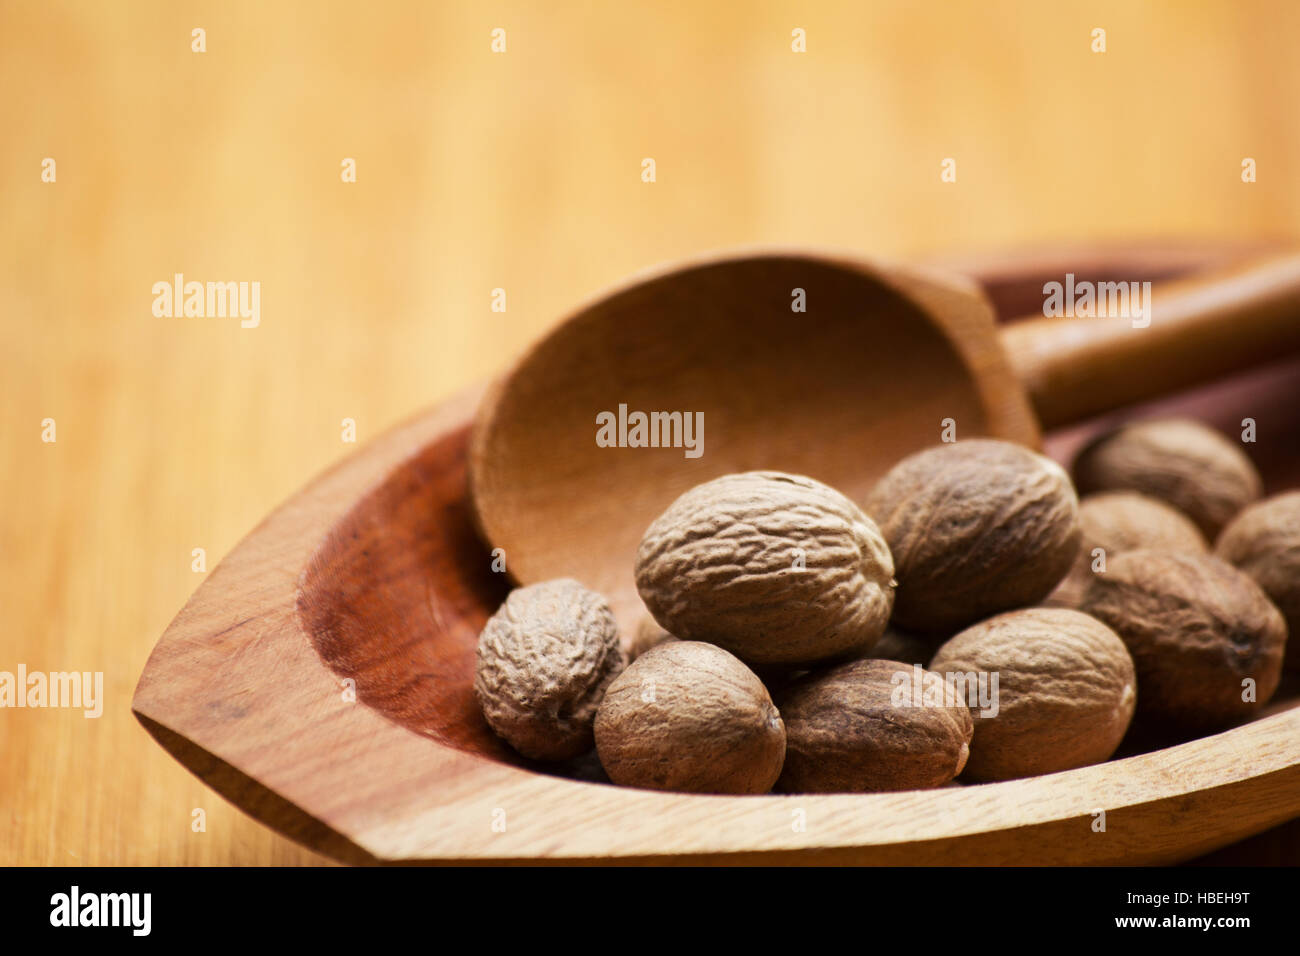 Nutmegs (Myristica fragrans) and wooden spoon in a bowl on a wooden table Stock Photo